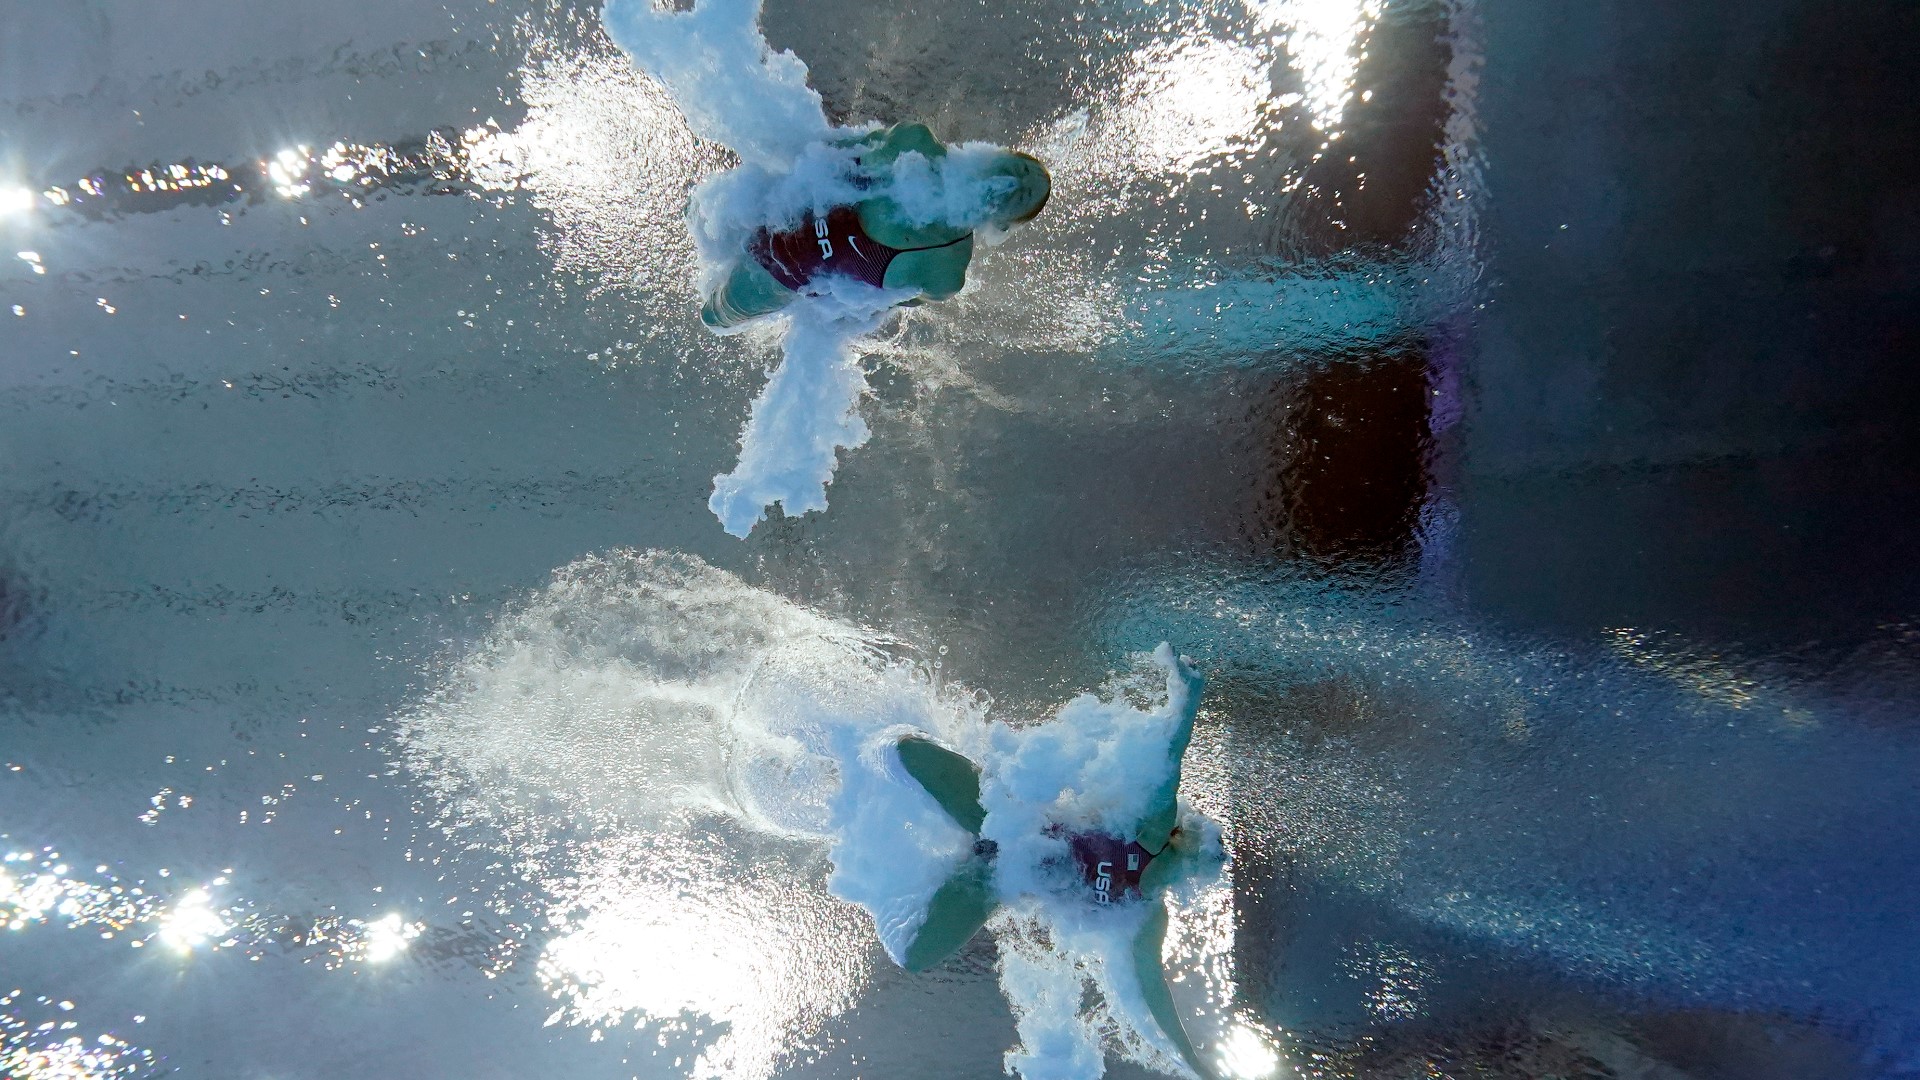 Fans noticed sprinklers spraying water on the pools during diving events in the 2020 Tokyo Olympics. Here's why they do it.